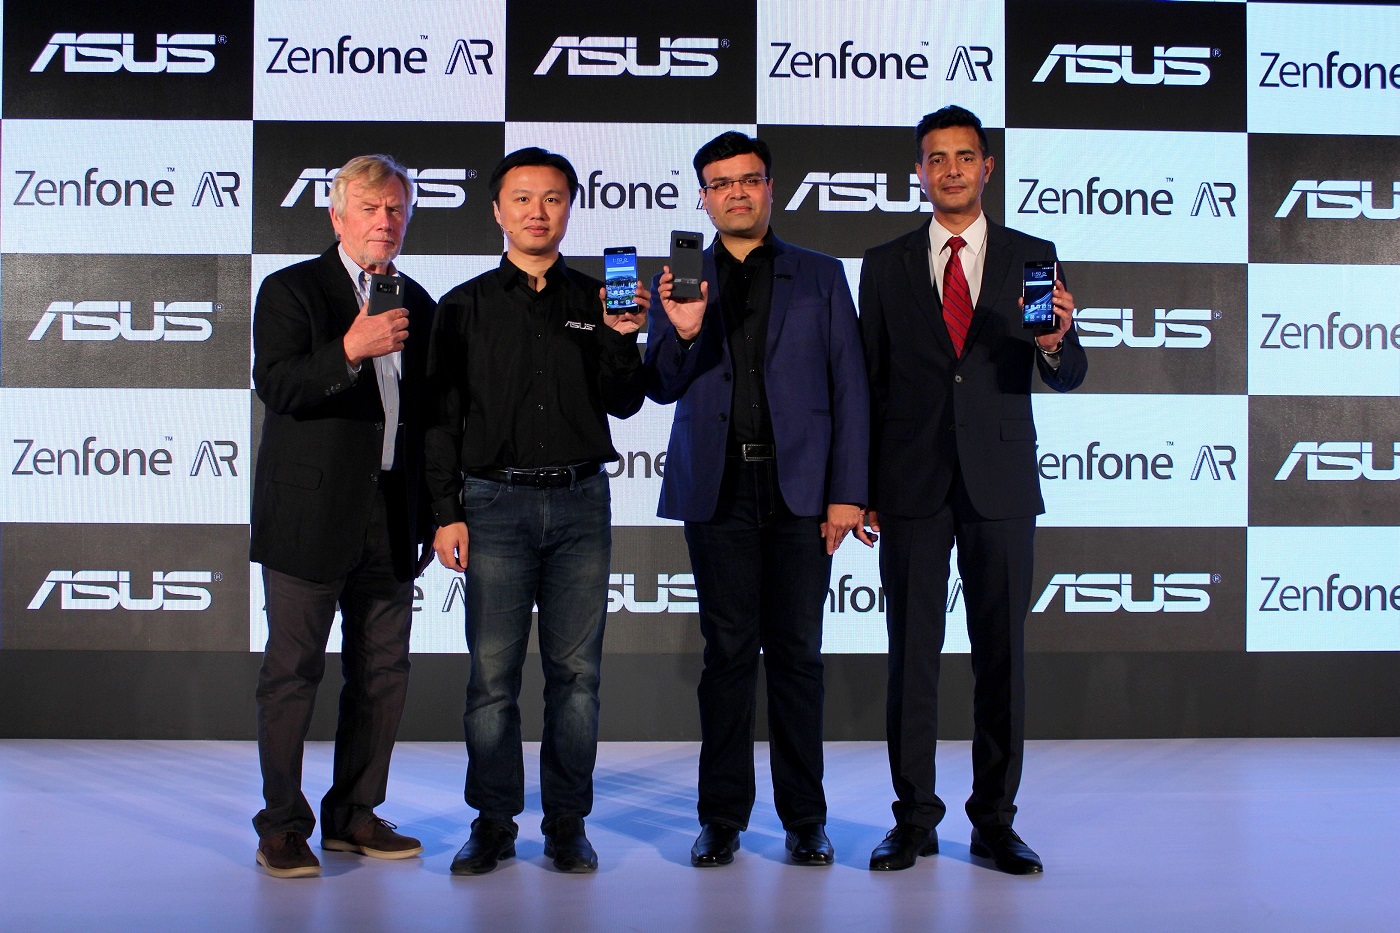 Asus Zenfone AR launched in India as a Flipkart exclusive device 4